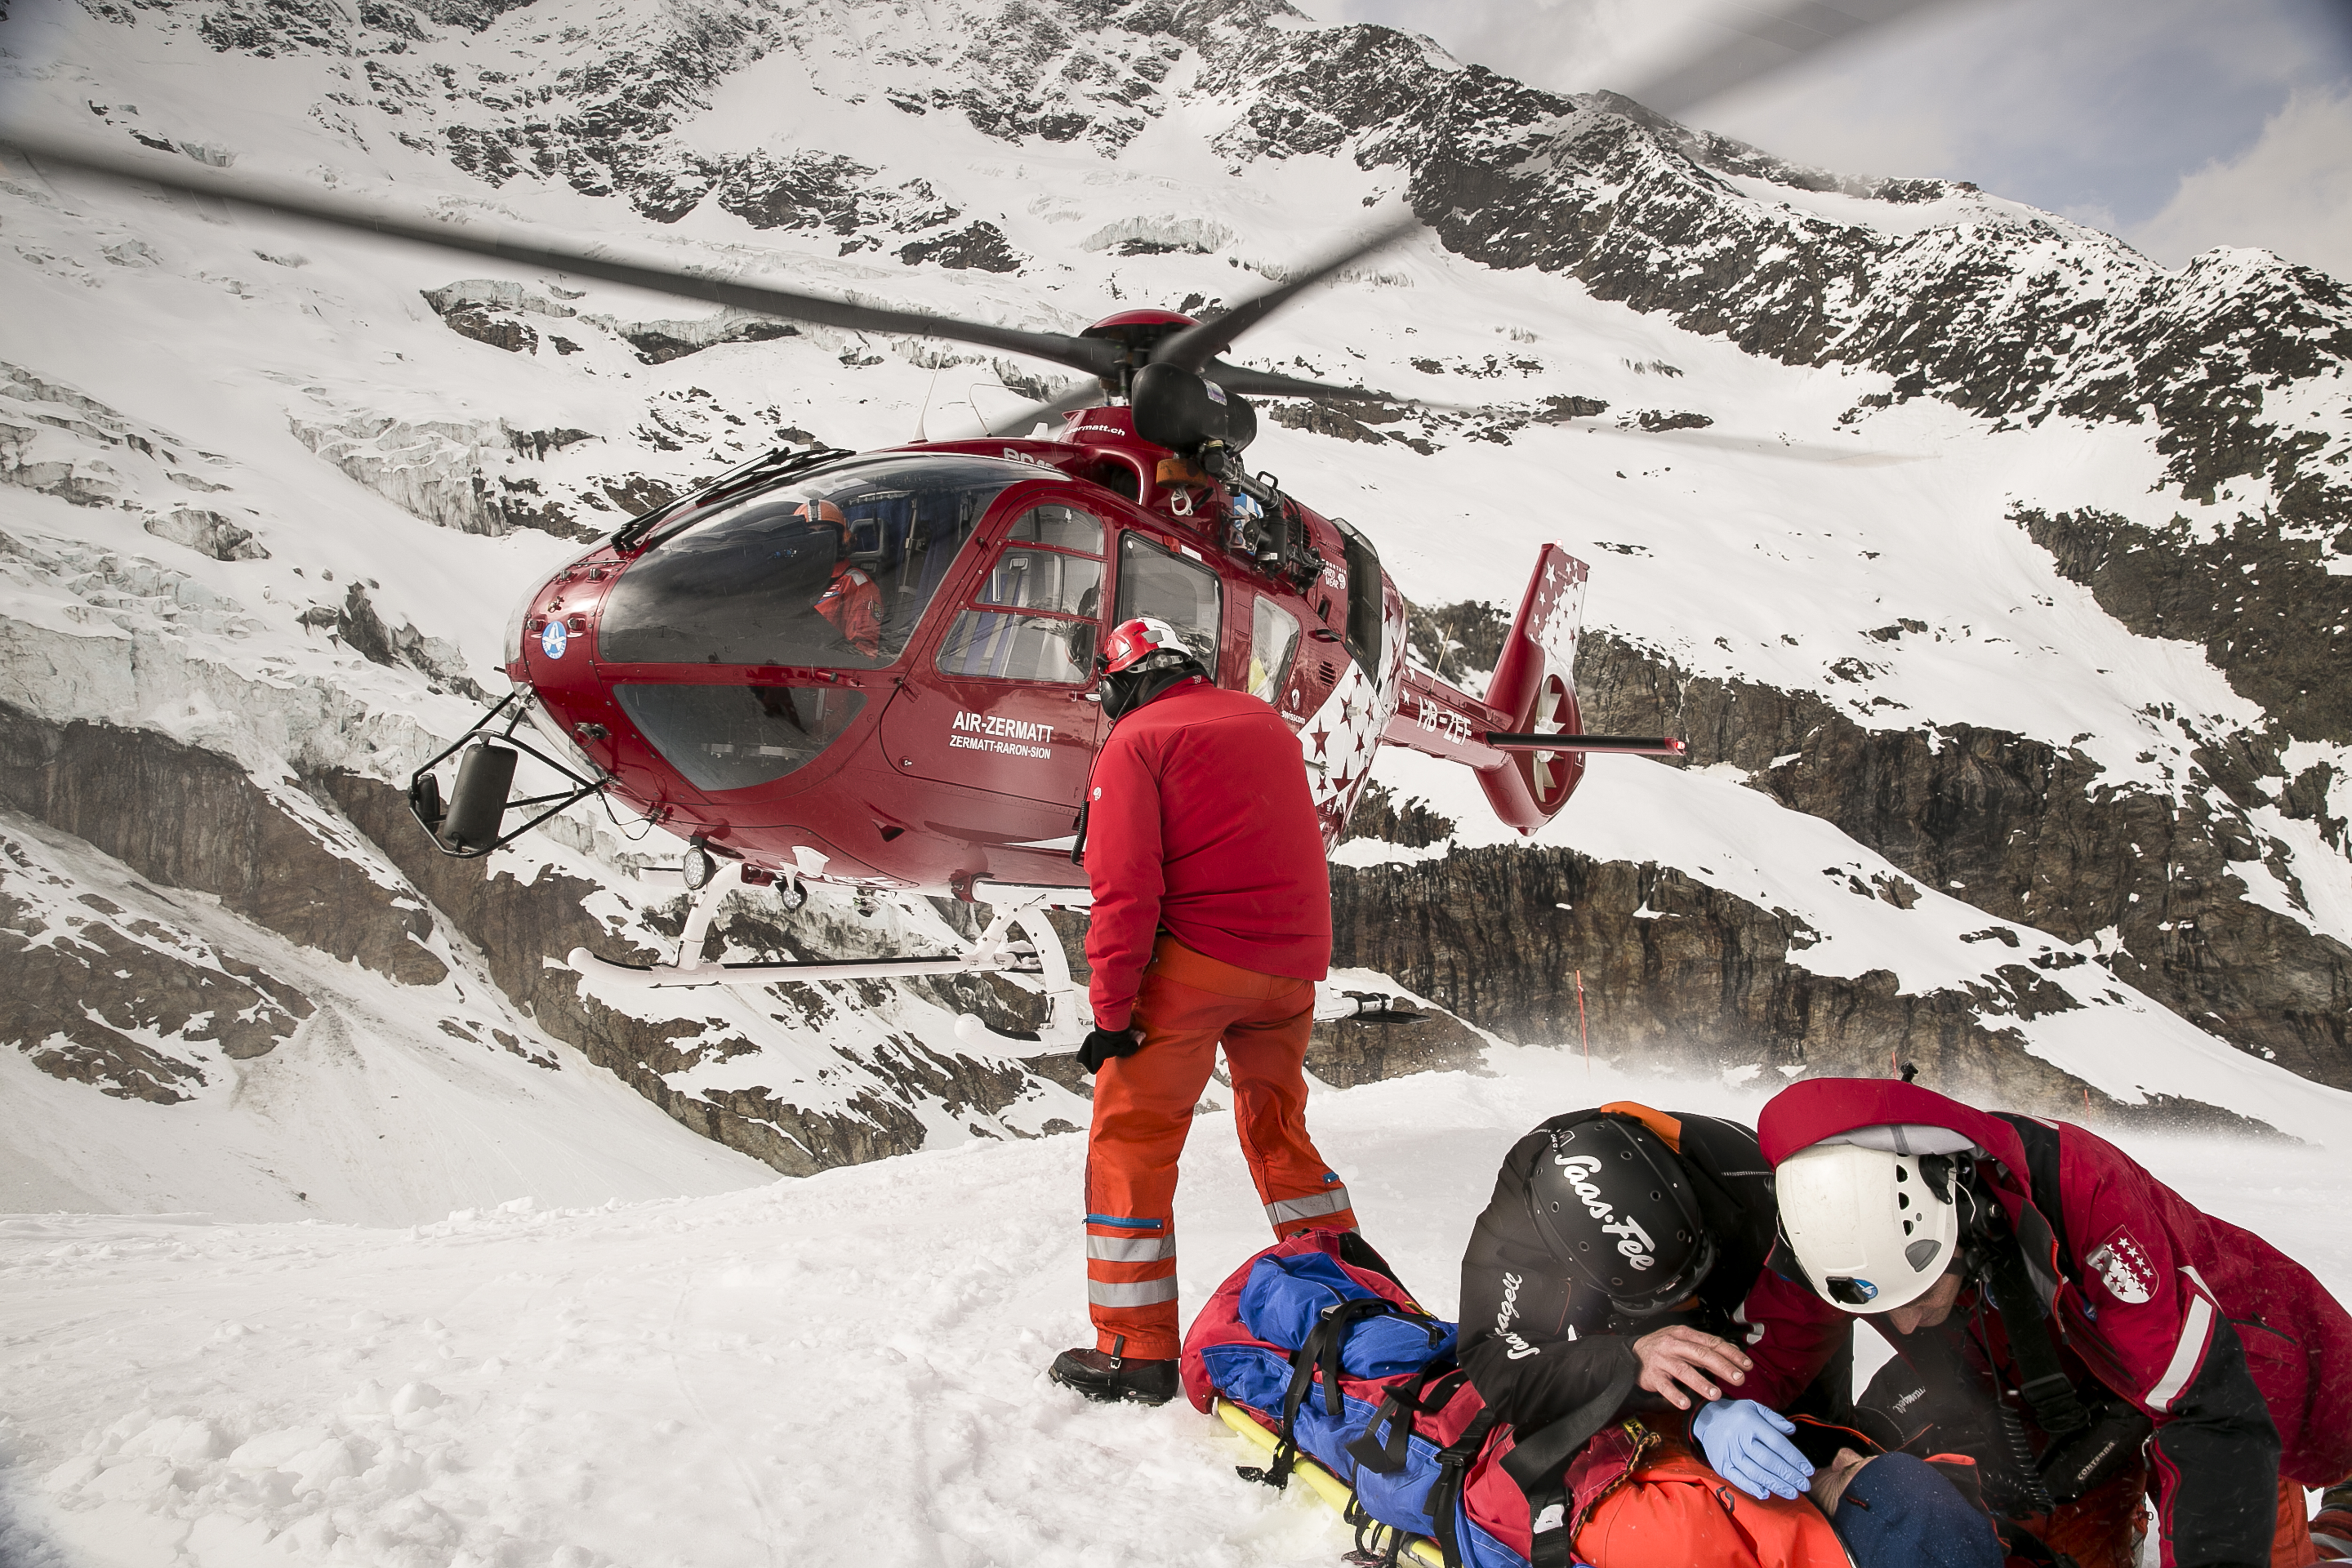 New TV series about Air Zermatt, the world’s best aerial search and rescue team